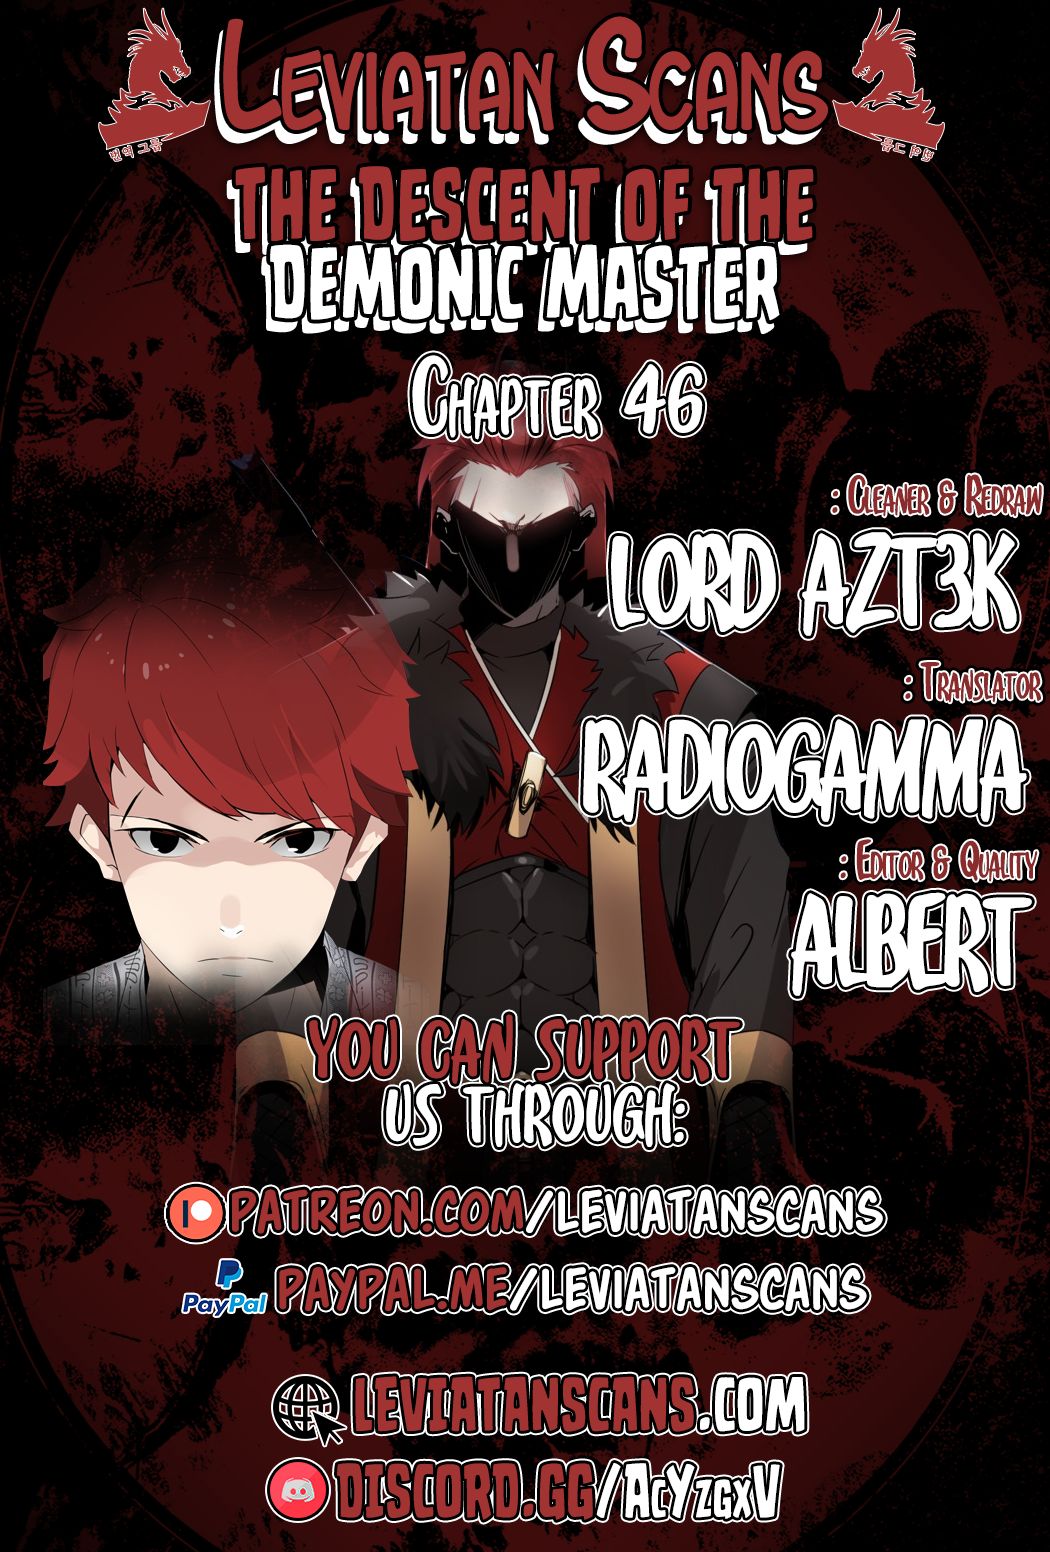 The Descent Of The Demonic Master Chapter 46